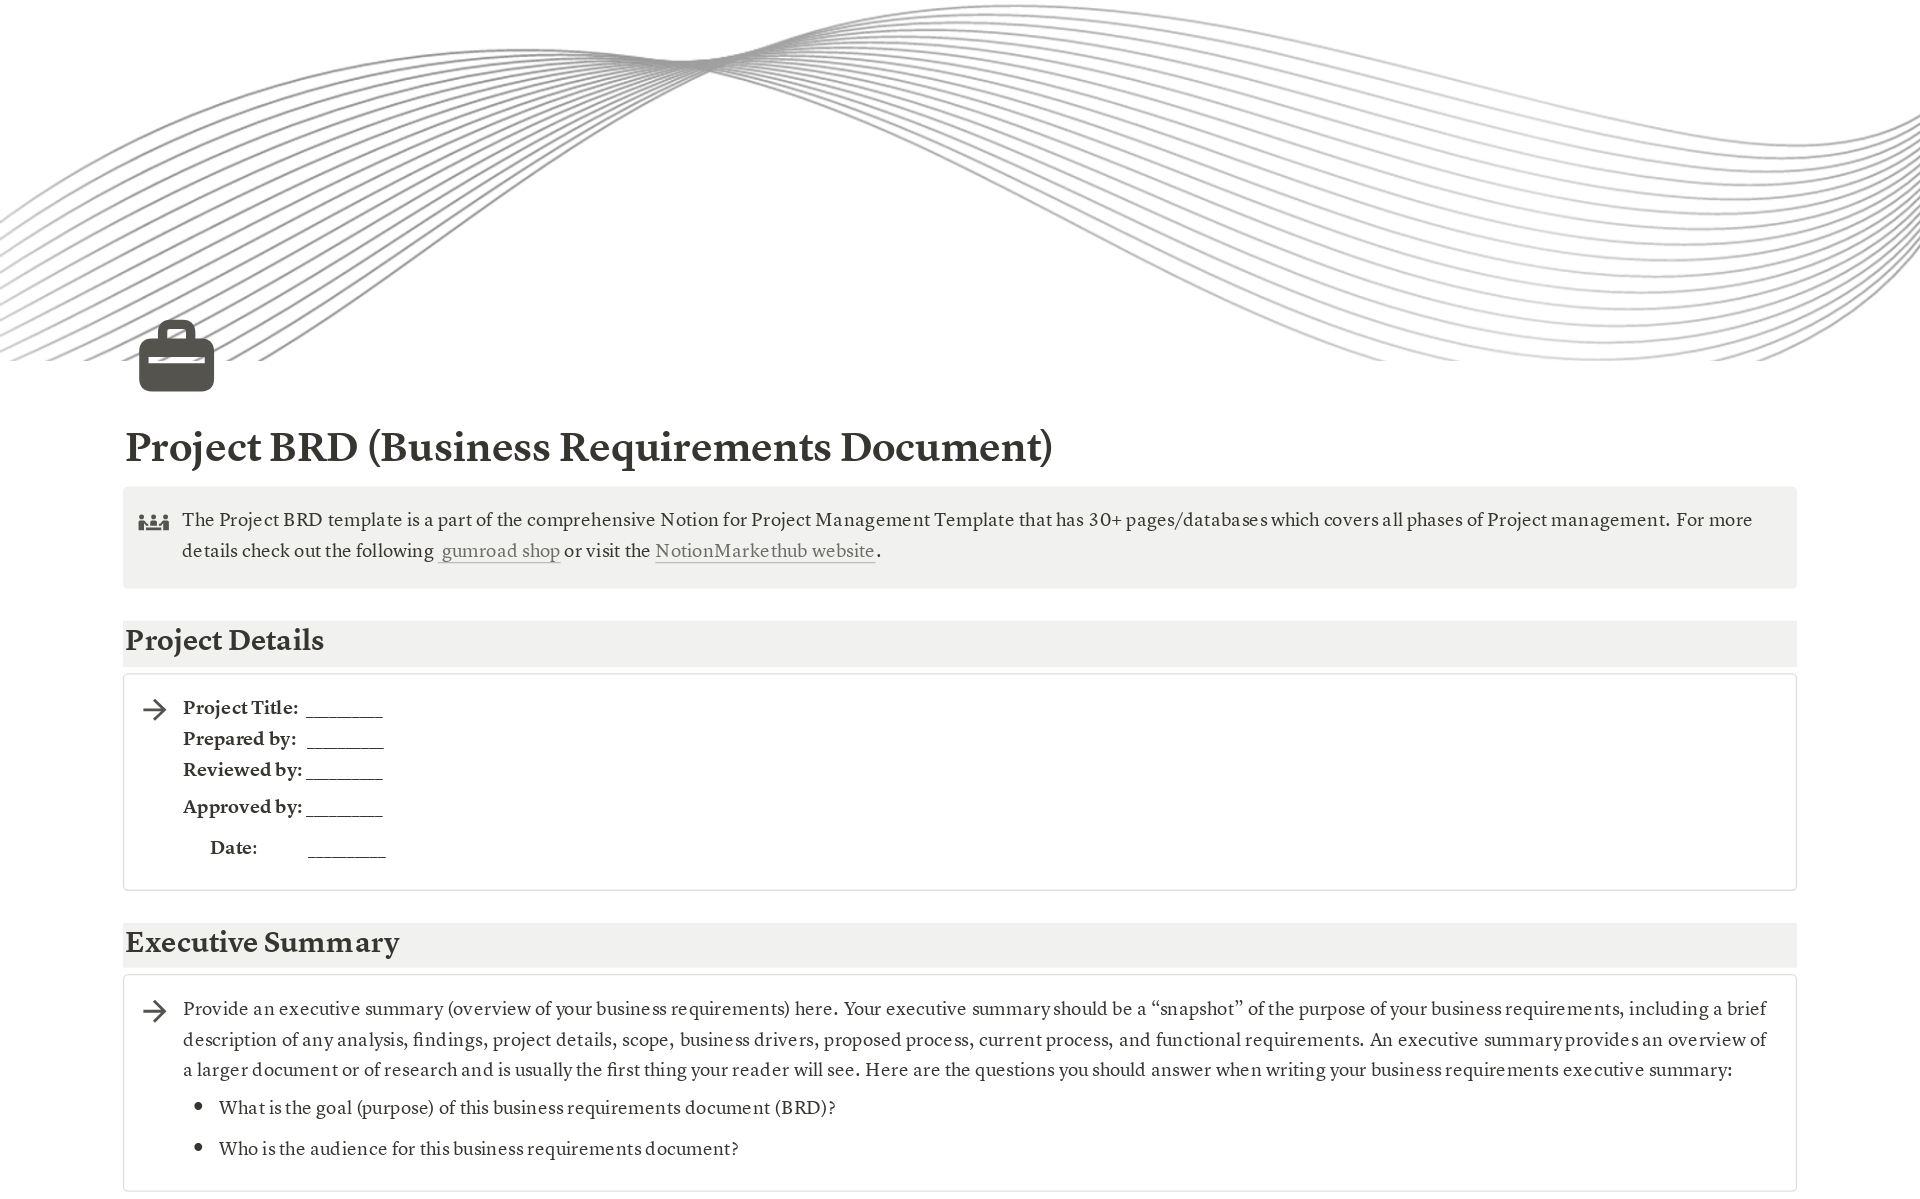 Are you ready to take your projects to the next level ? Say hello to streamlined project management with our BRD (Business Requirements Document) template, a key component of the ultimate project management toolkit in Notion.